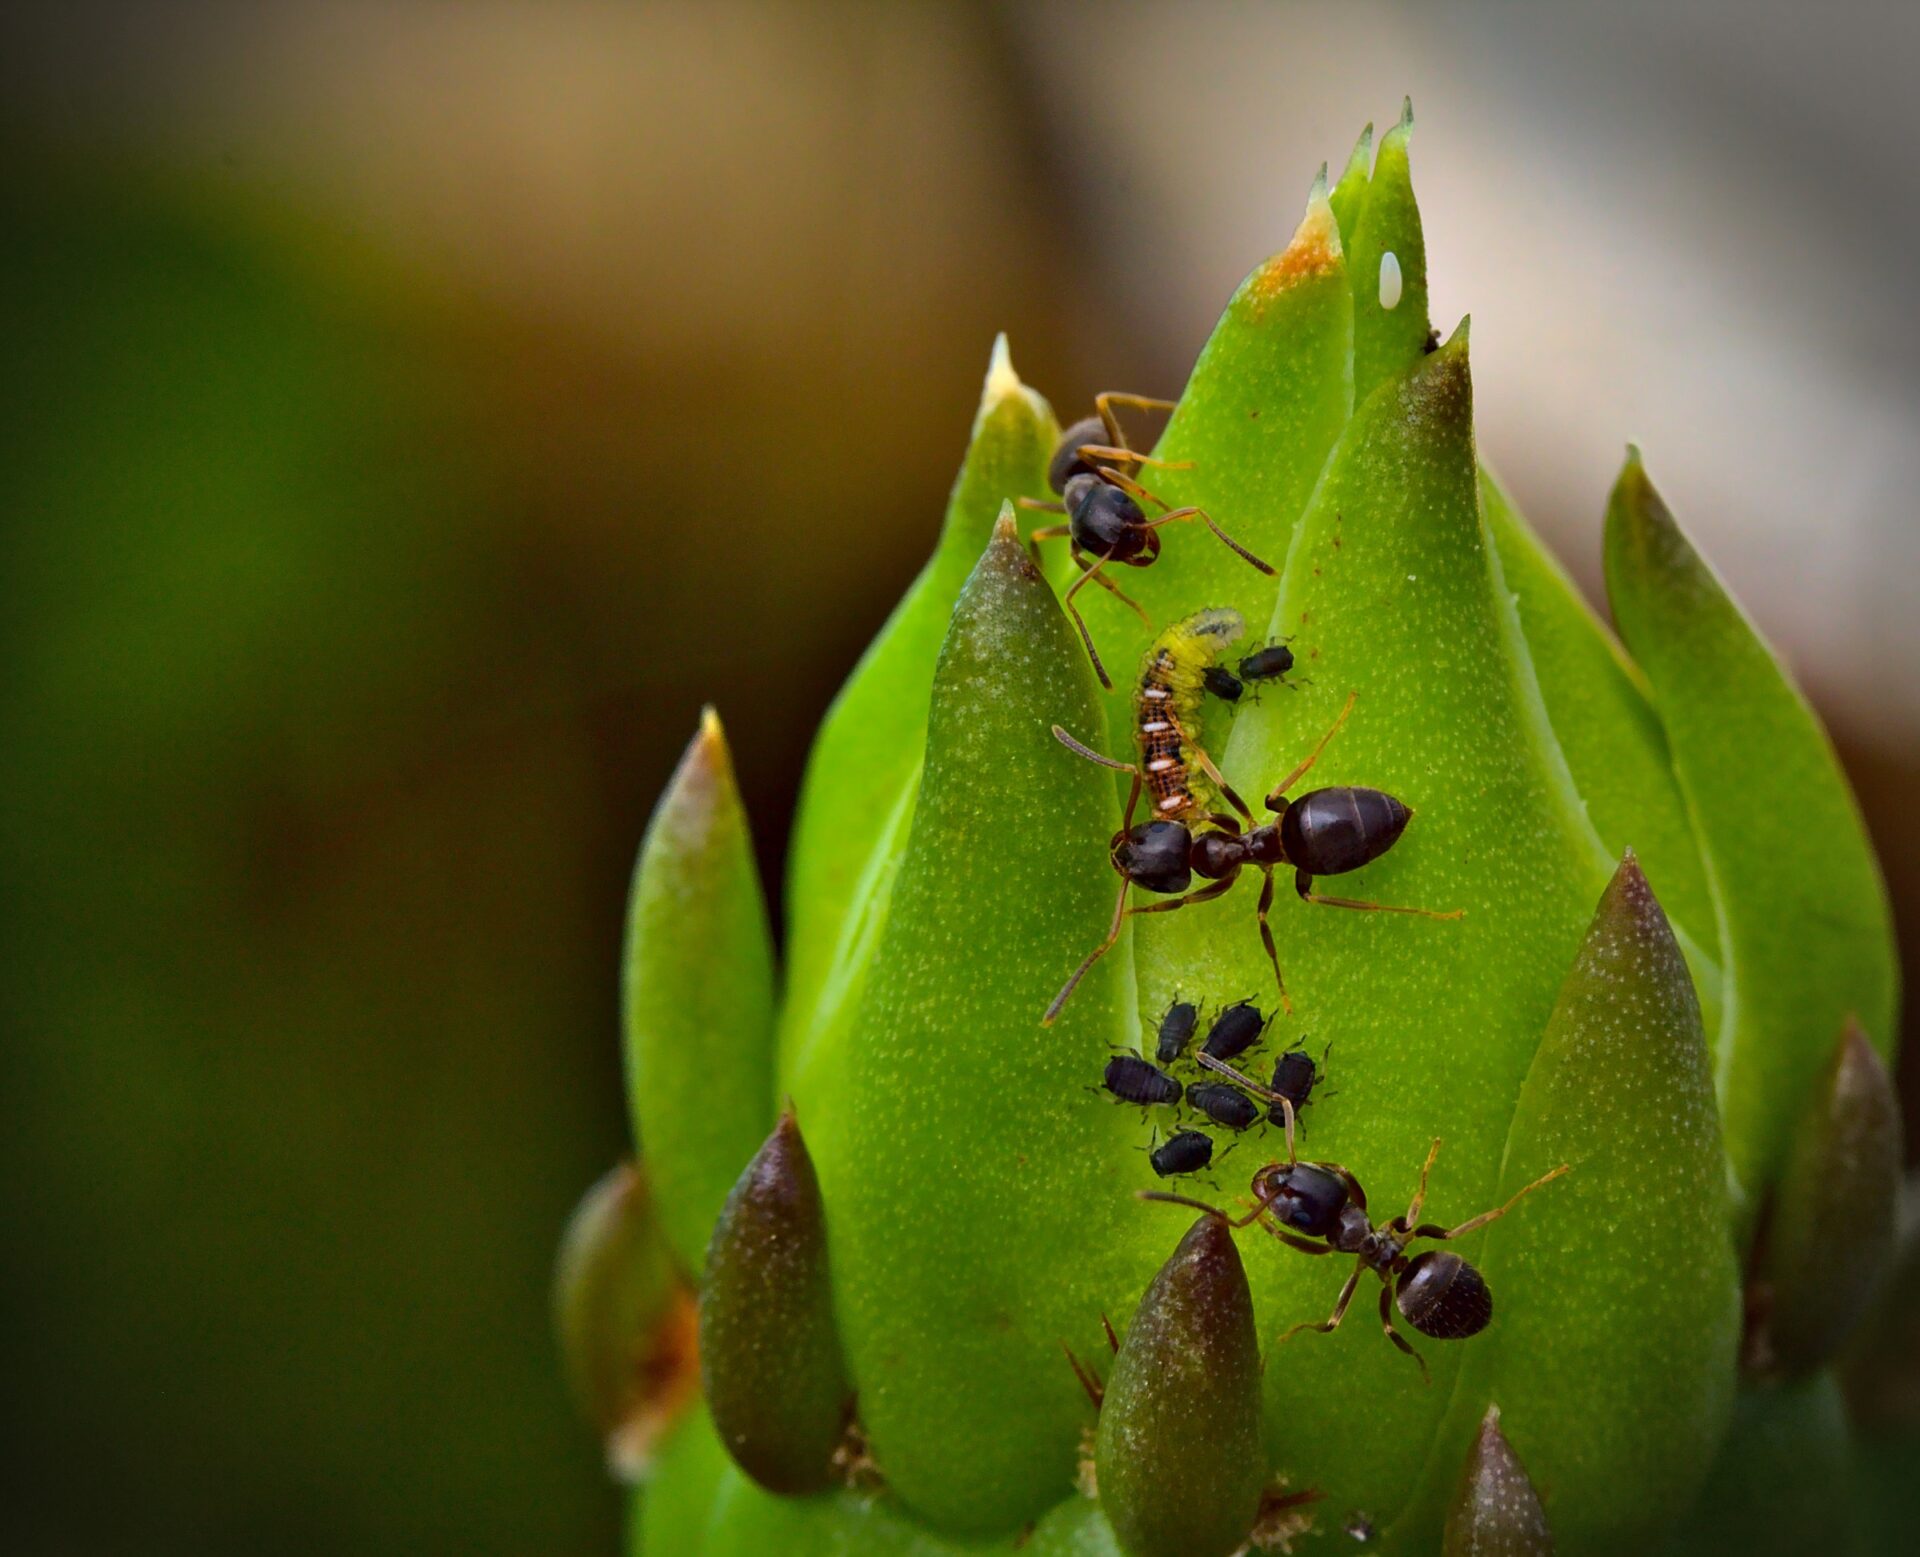 Lasius neoniger workers tend to aphids on the bud of a Prickly Pear flower.